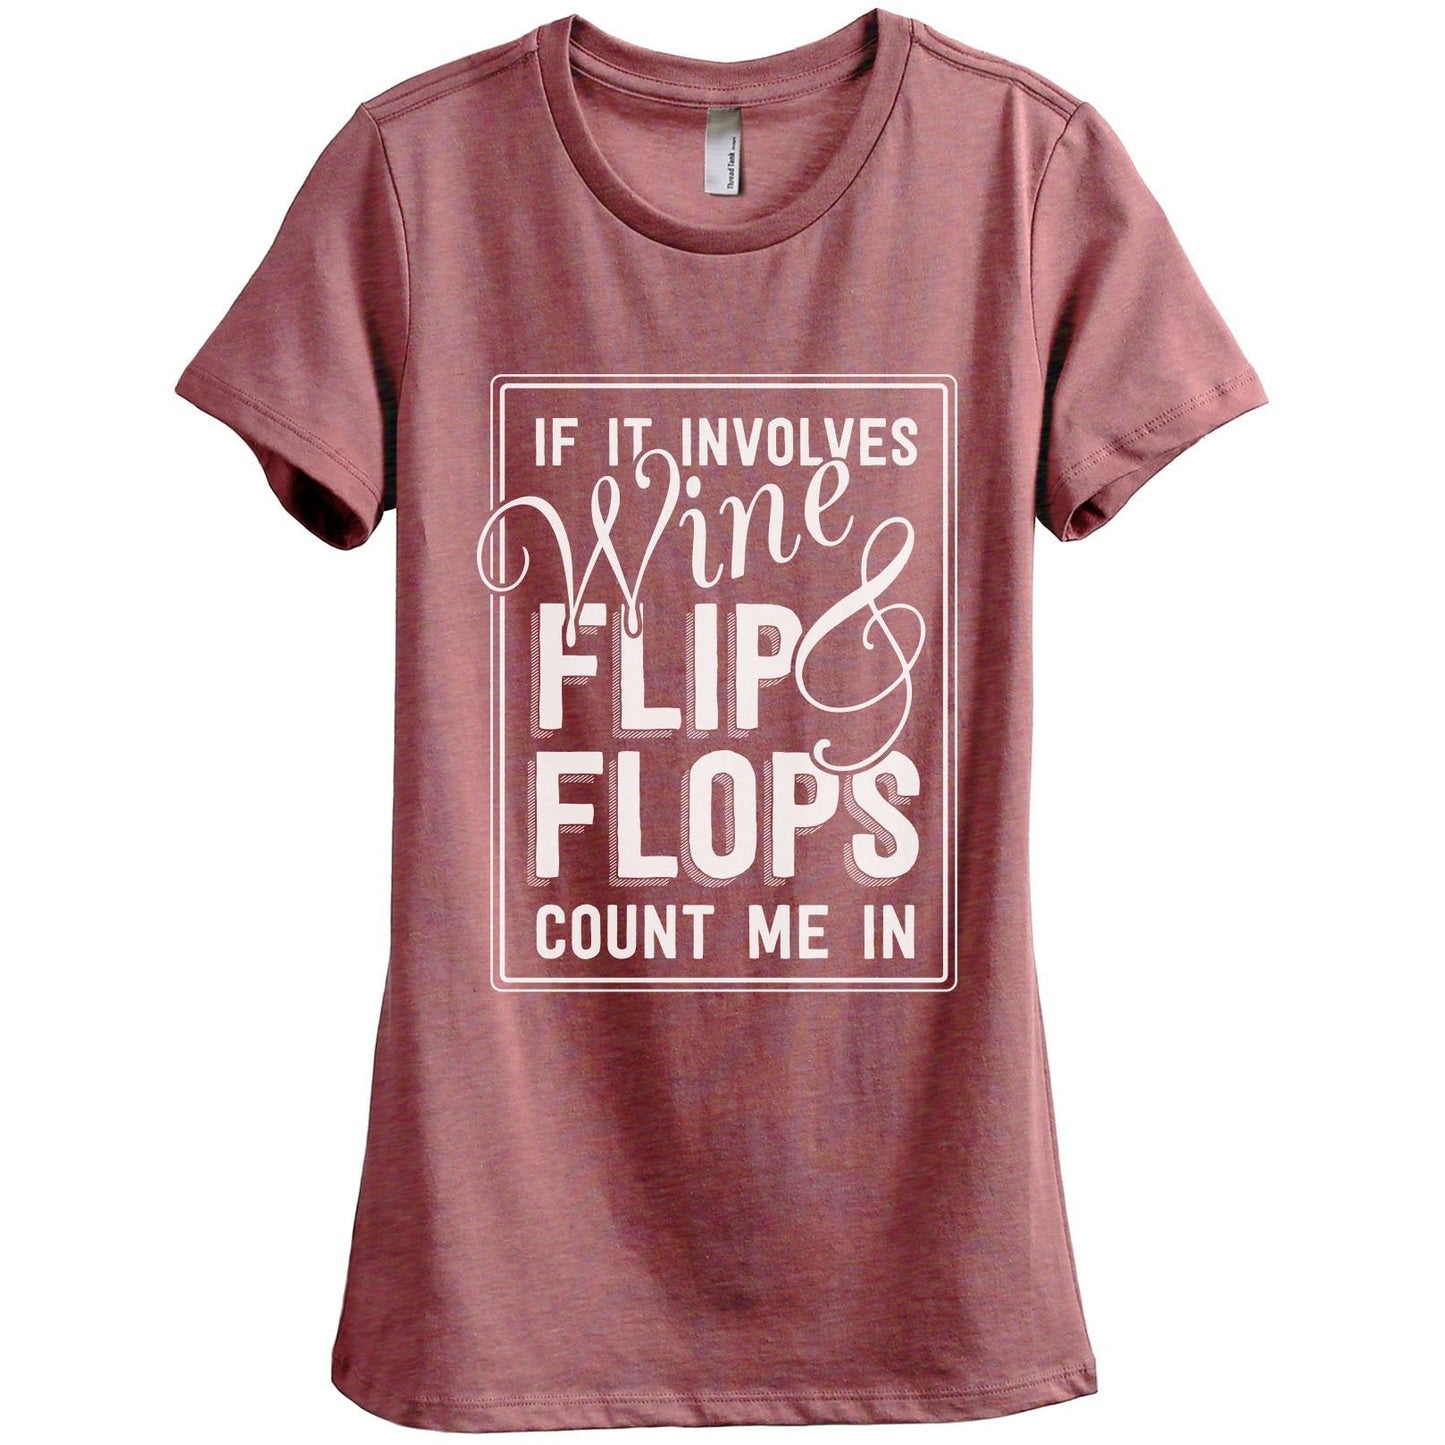 If It Involves Wine And Flip Flops Count Me In Women's Relaxed Crewneck T-Shirt Top Tee Heather Rouge
